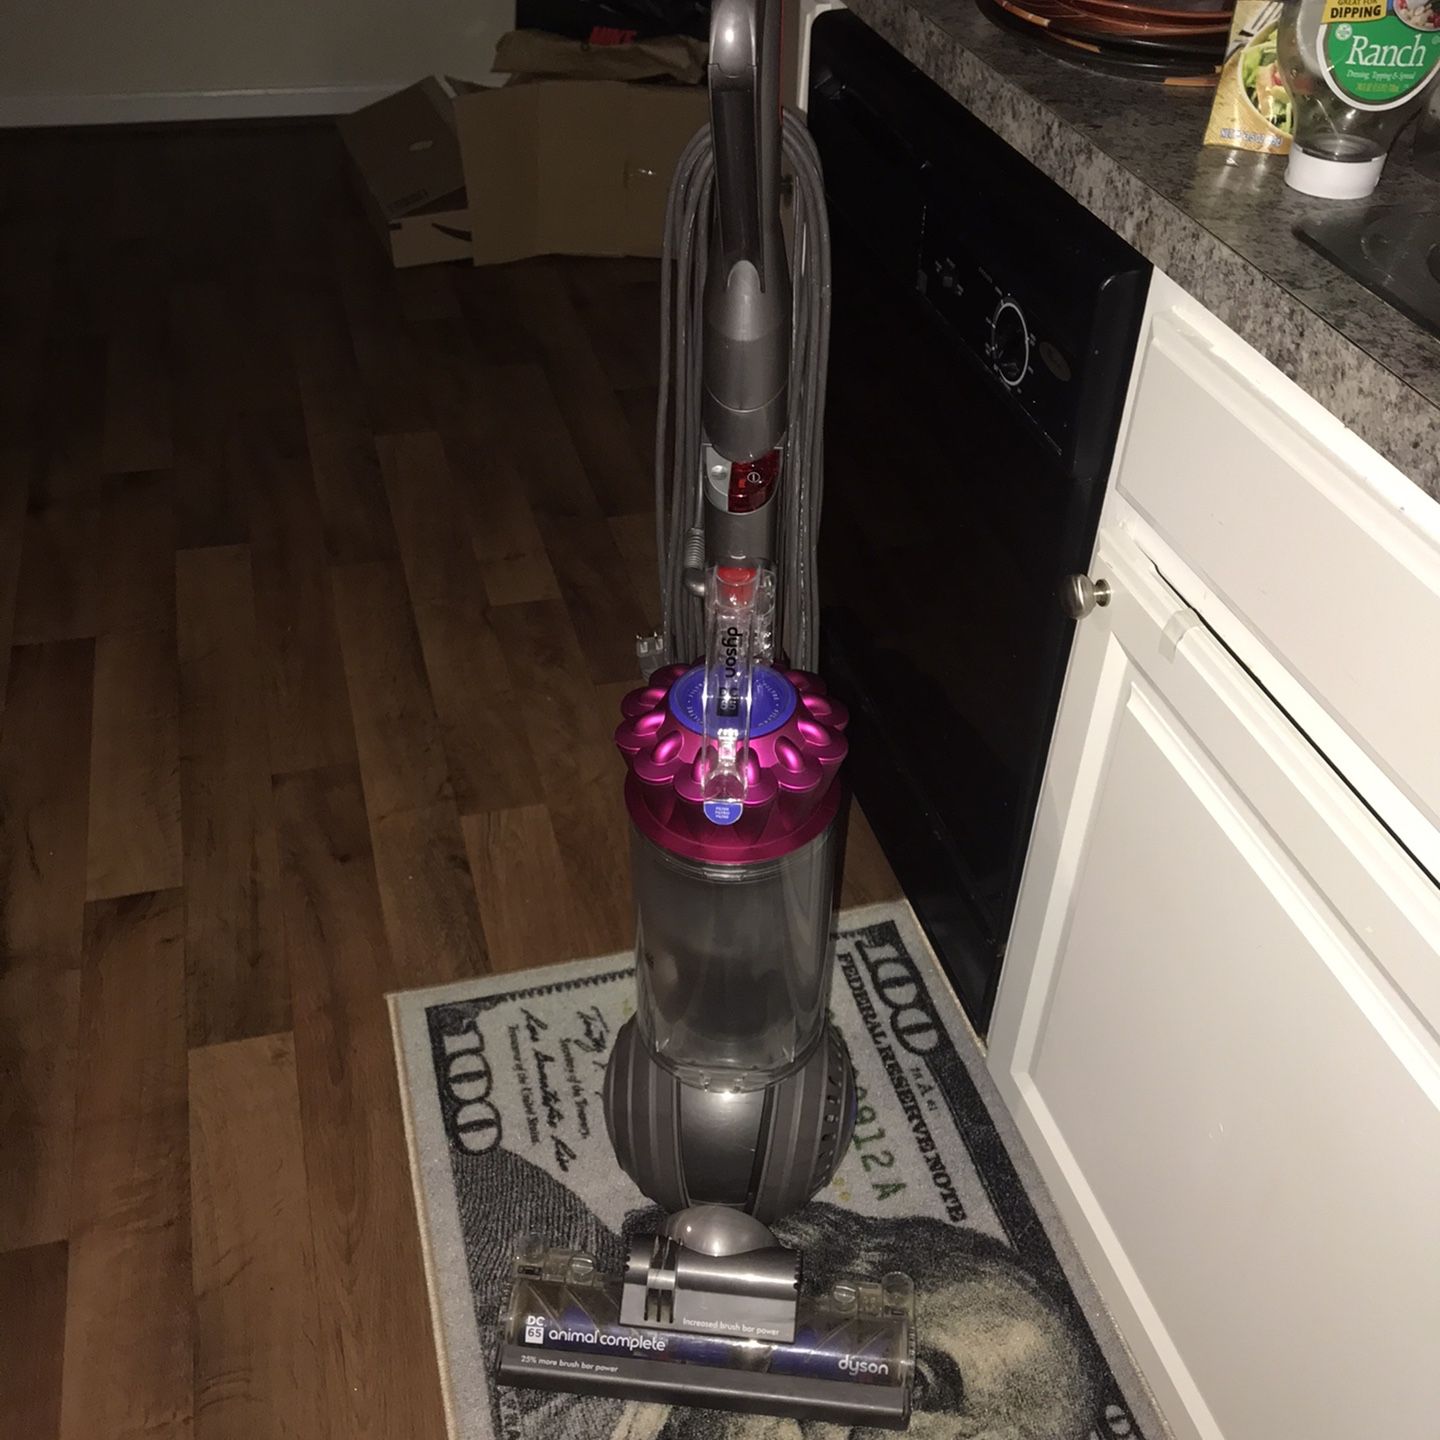 Dyson DC65 Animal Complete Vacuum Cleaner.